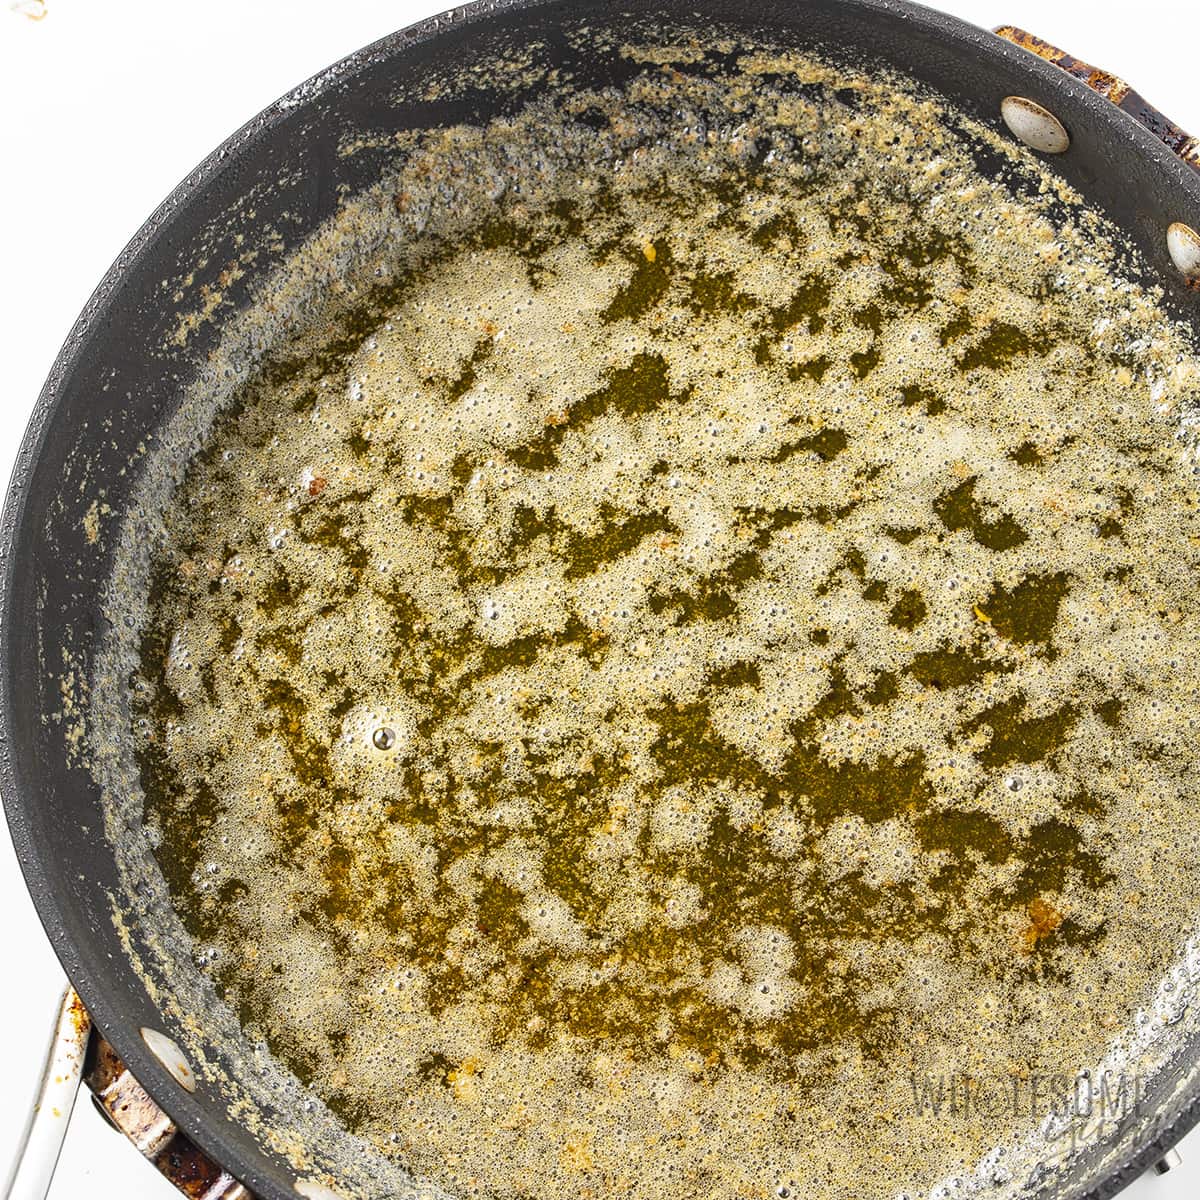 Melt browned butter in a pan.